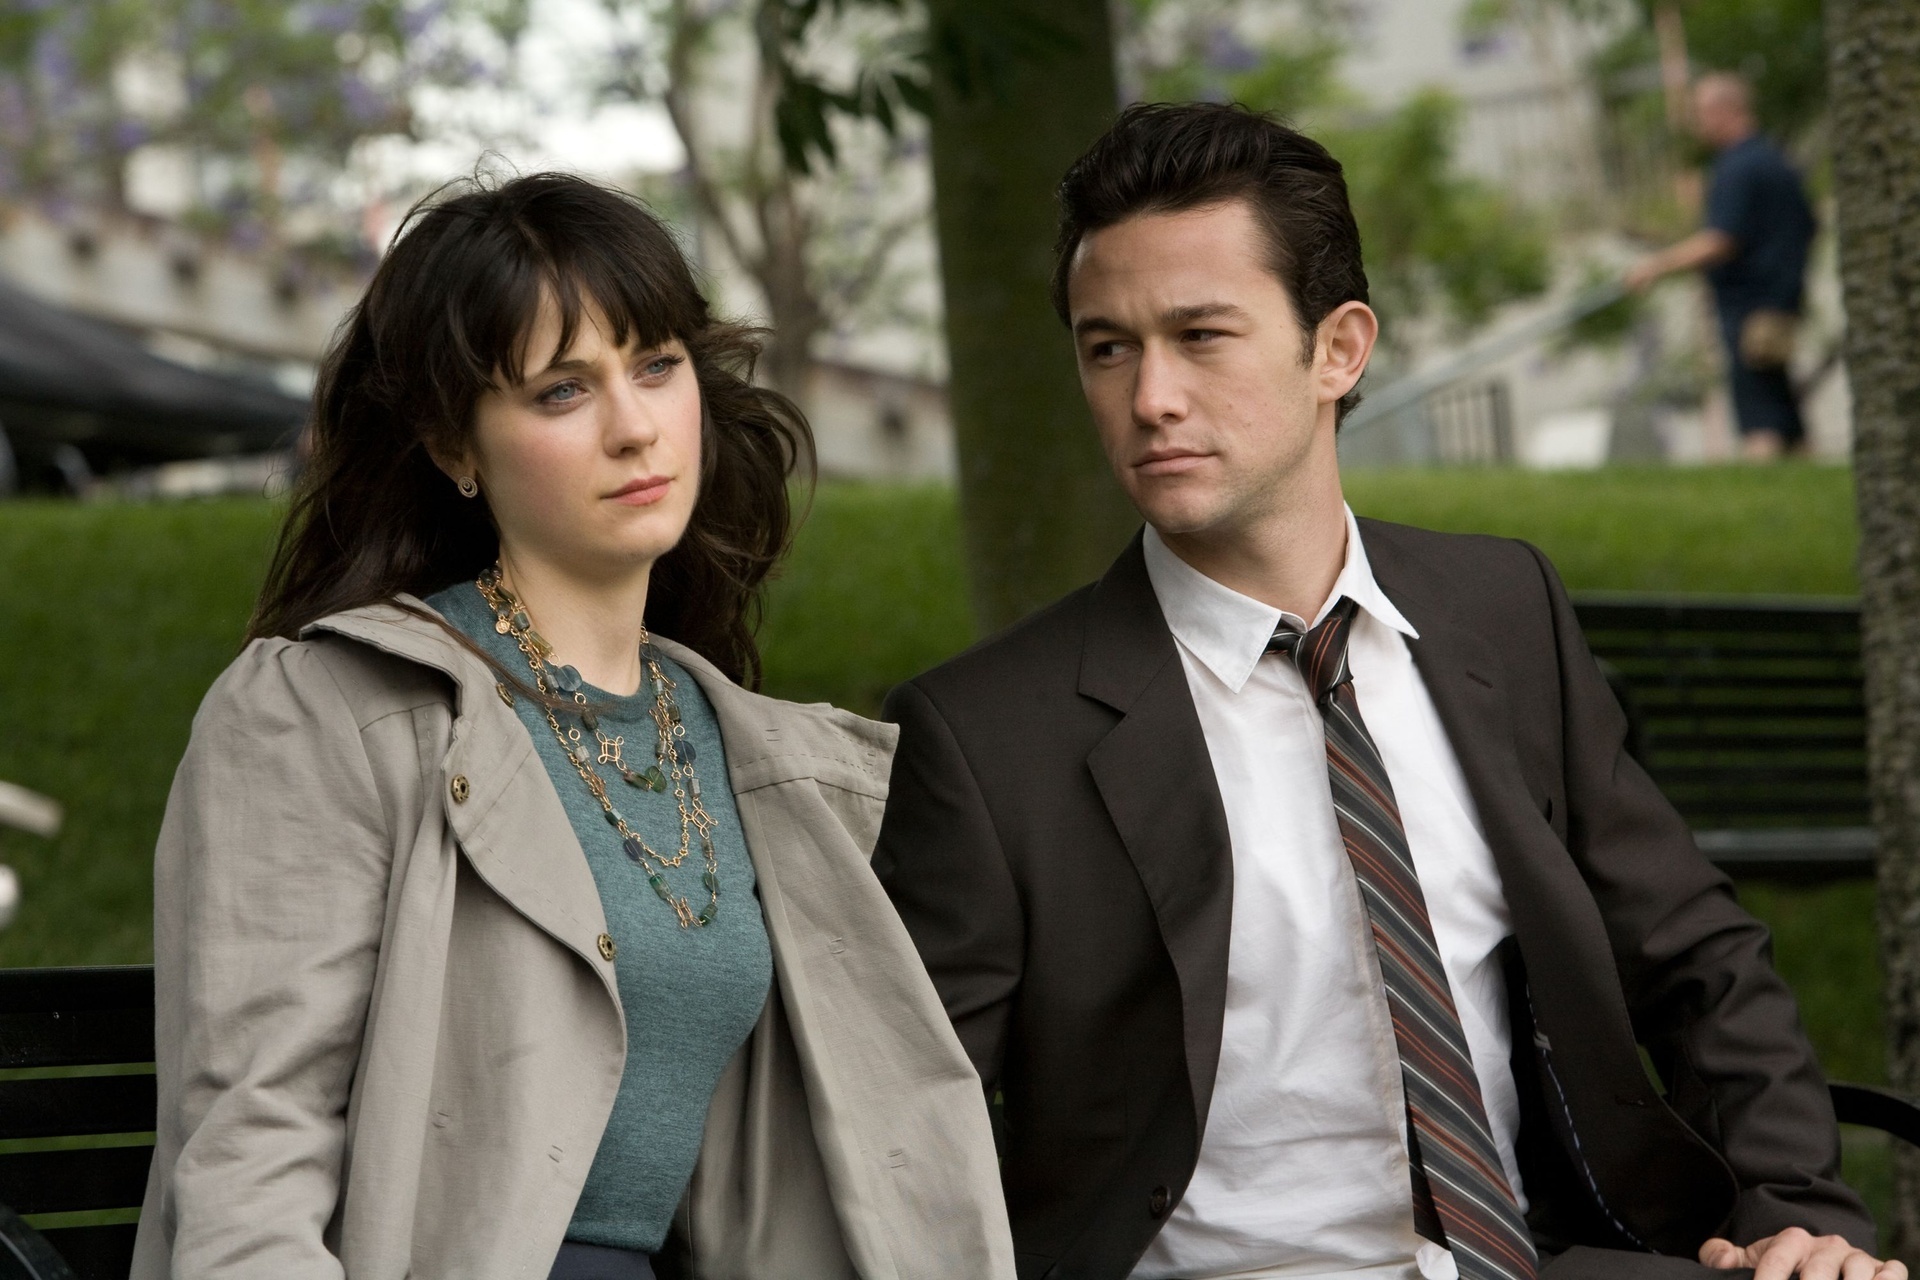 (500) Days of Summer: Romantic comedy about love and fate, Relationship reveal. 1920x1280 HD Wallpaper.